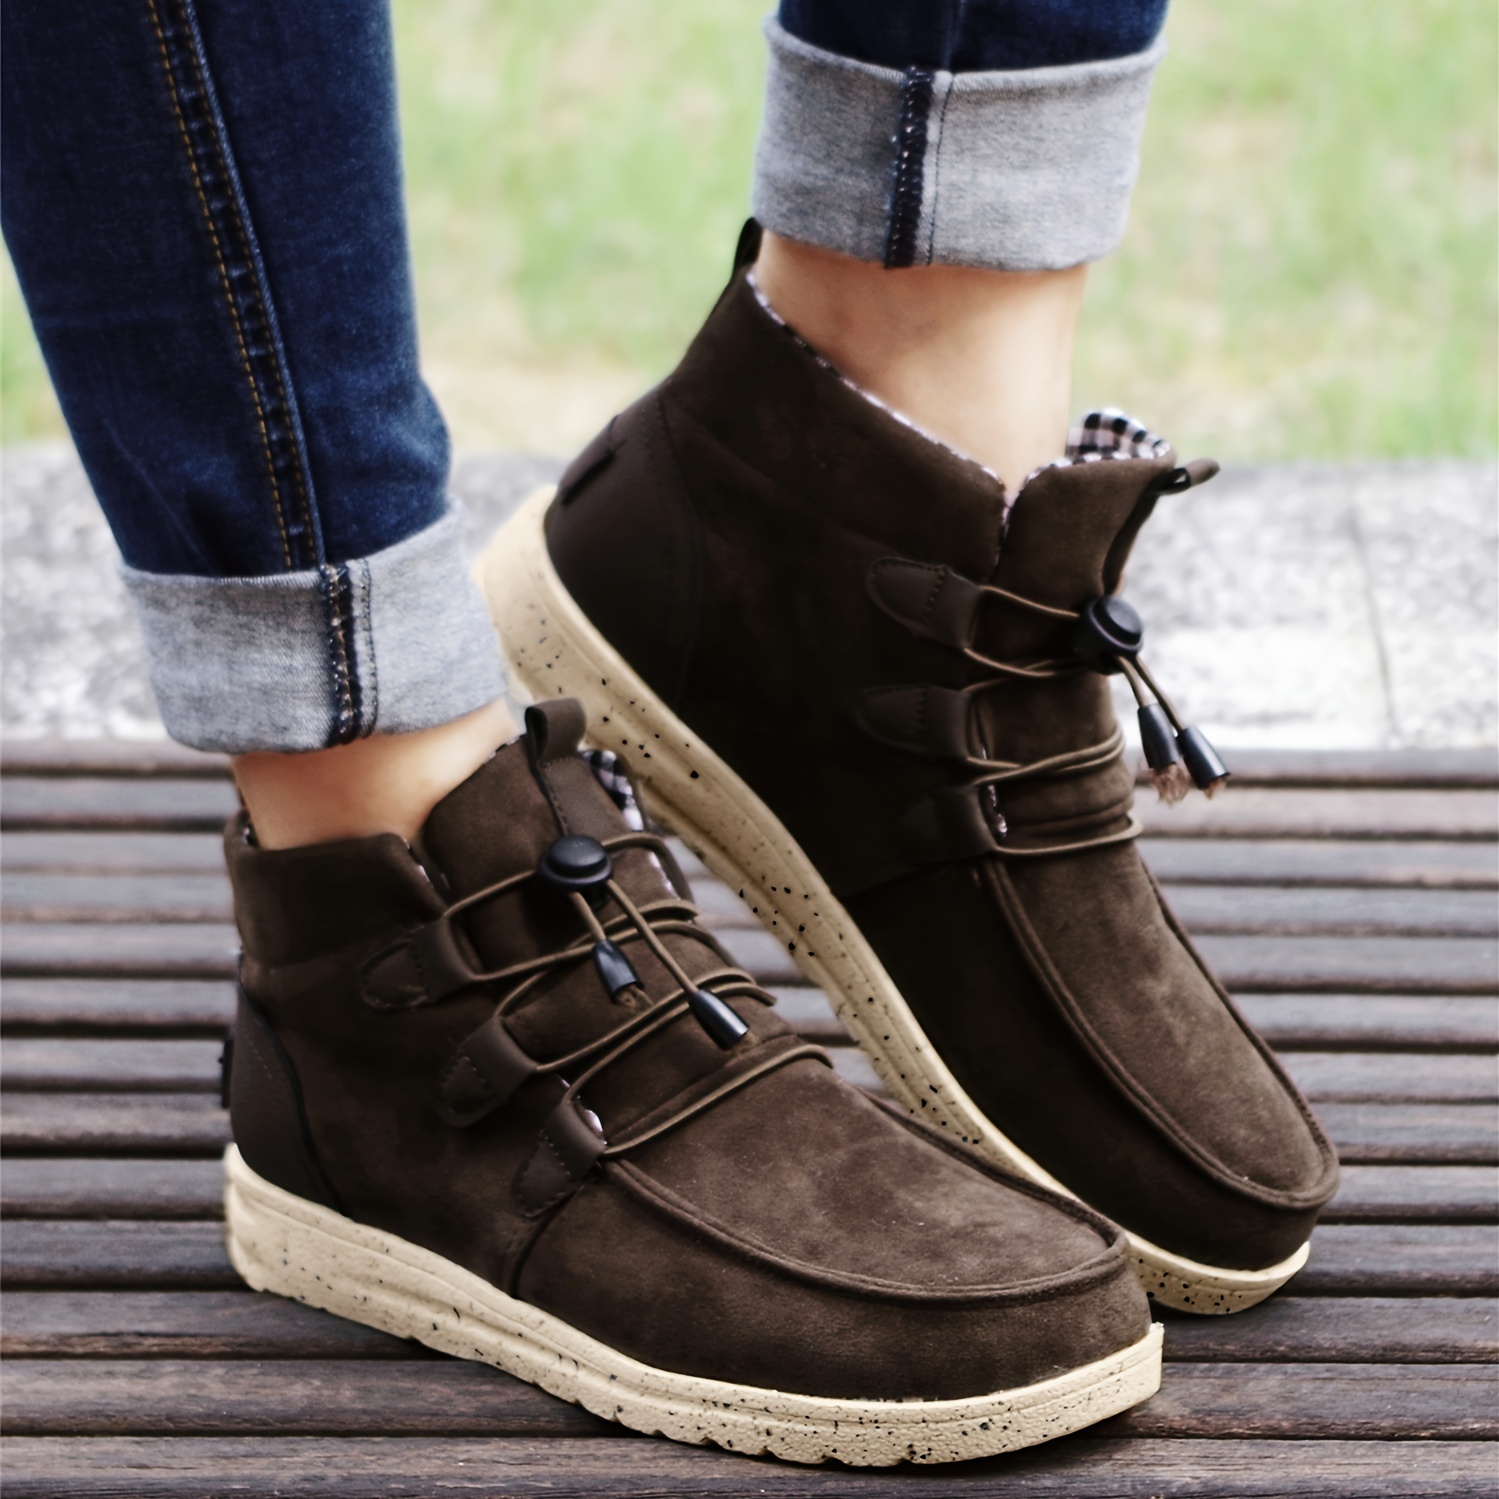 Shoes for Women, Ladies Boots, Shoes